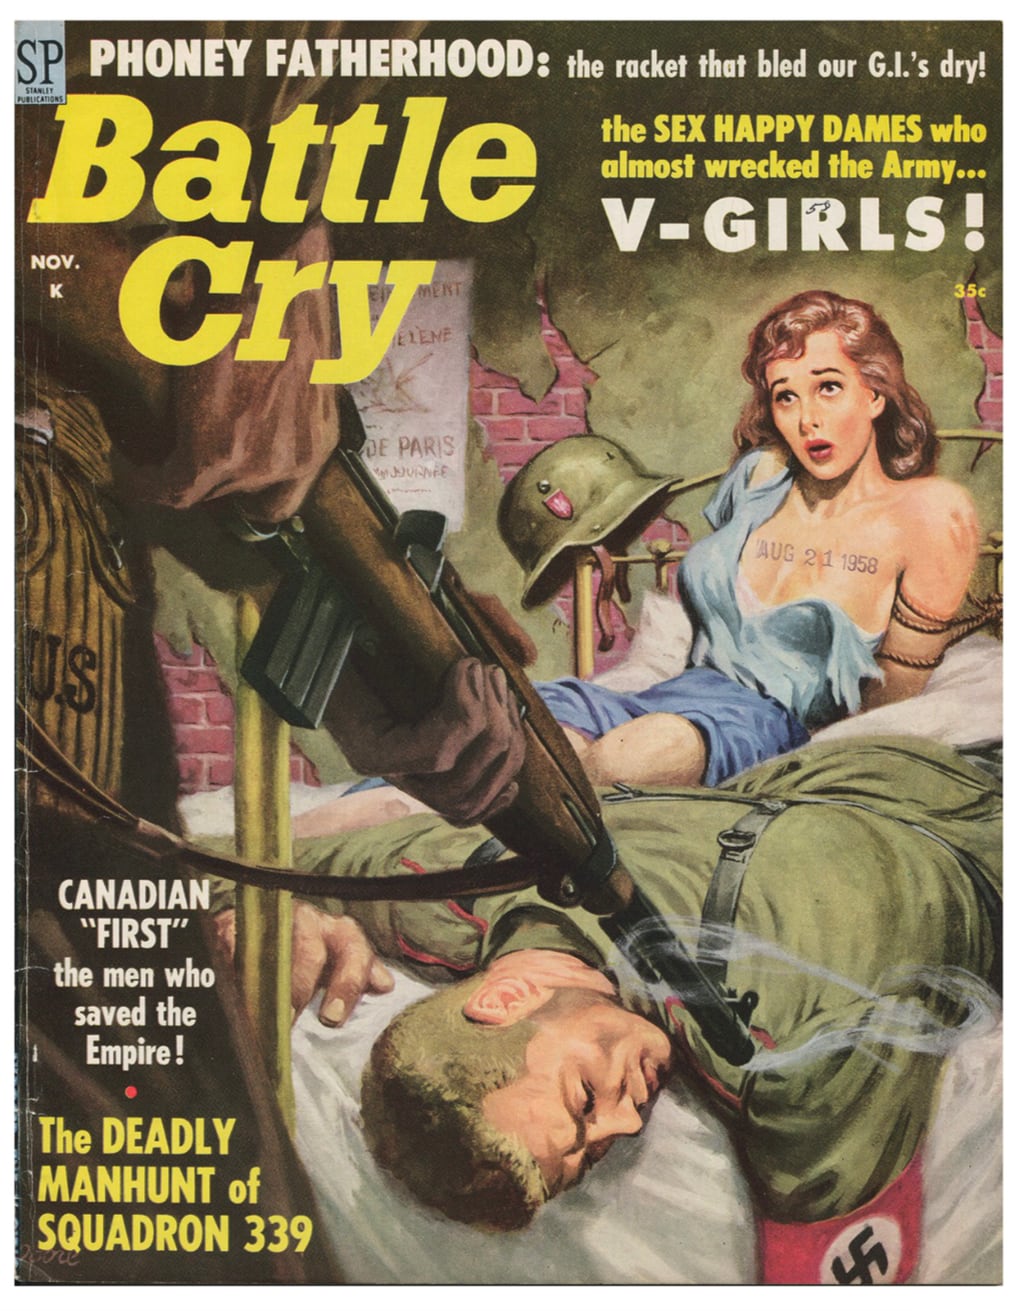 Vietnam War Pornography - War, heroism and sex: Pulp magazines & the messages they perpetuated